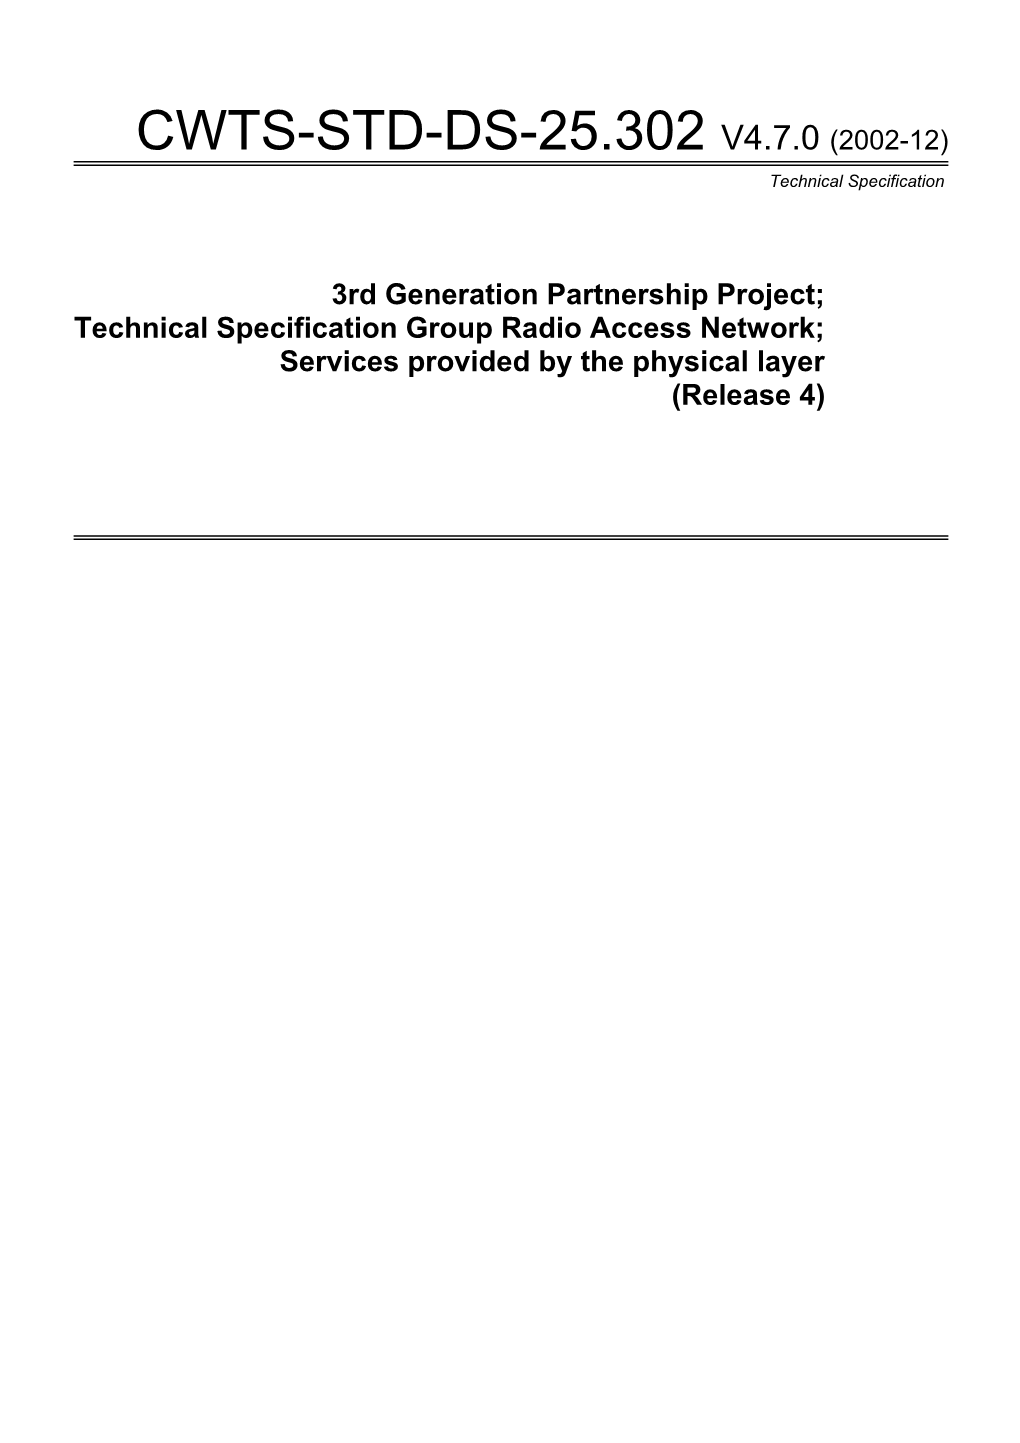 Technical Specification Group Radio Access Network; s6